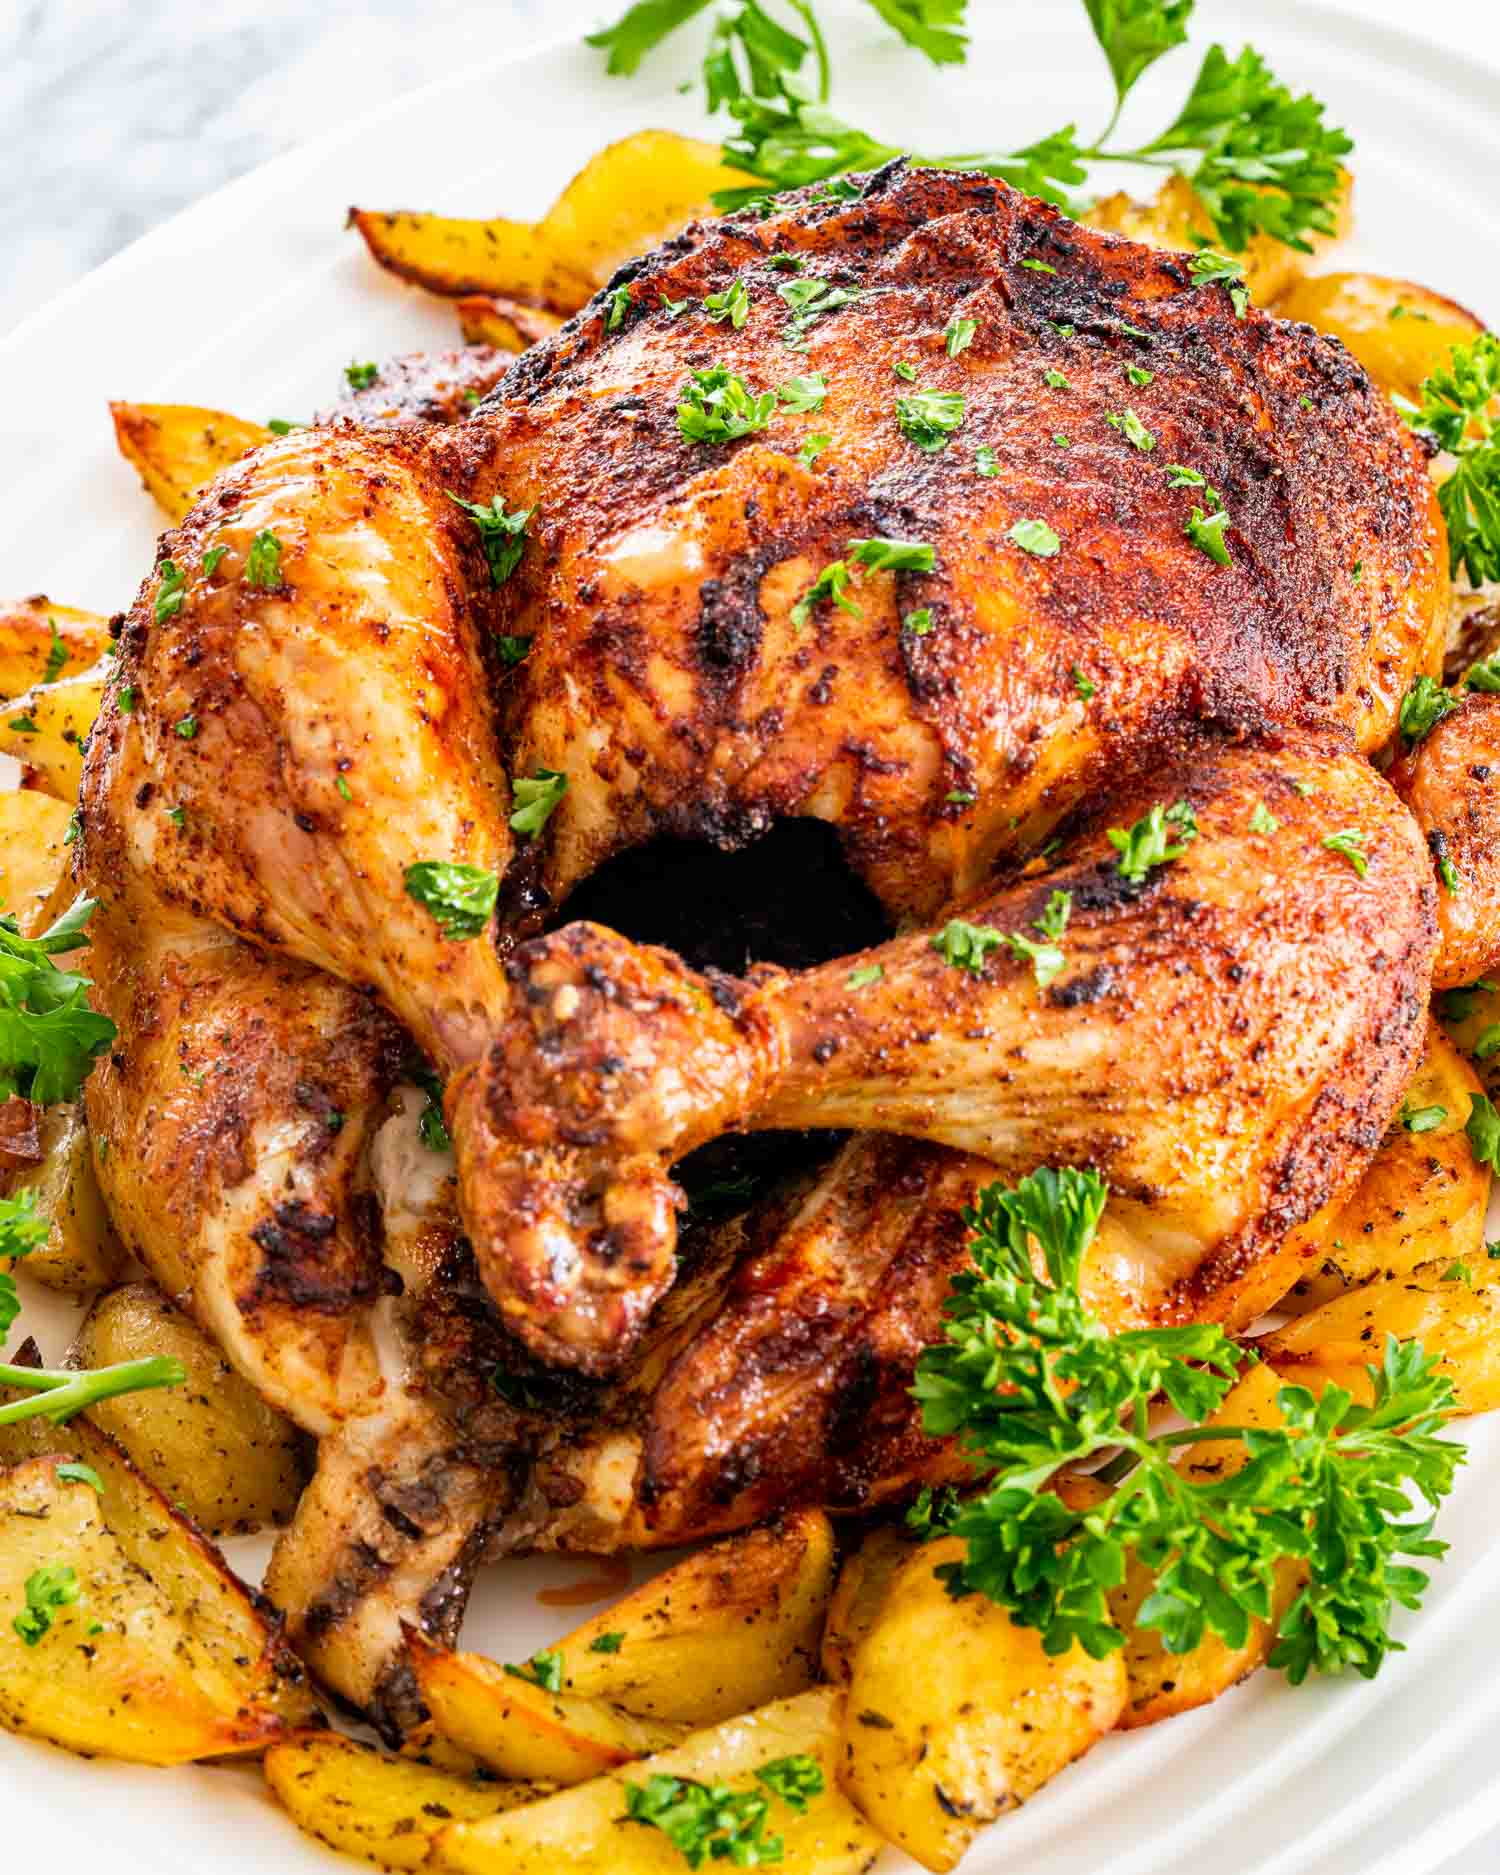 a full roast chicken on a platter with roasted potatoes.